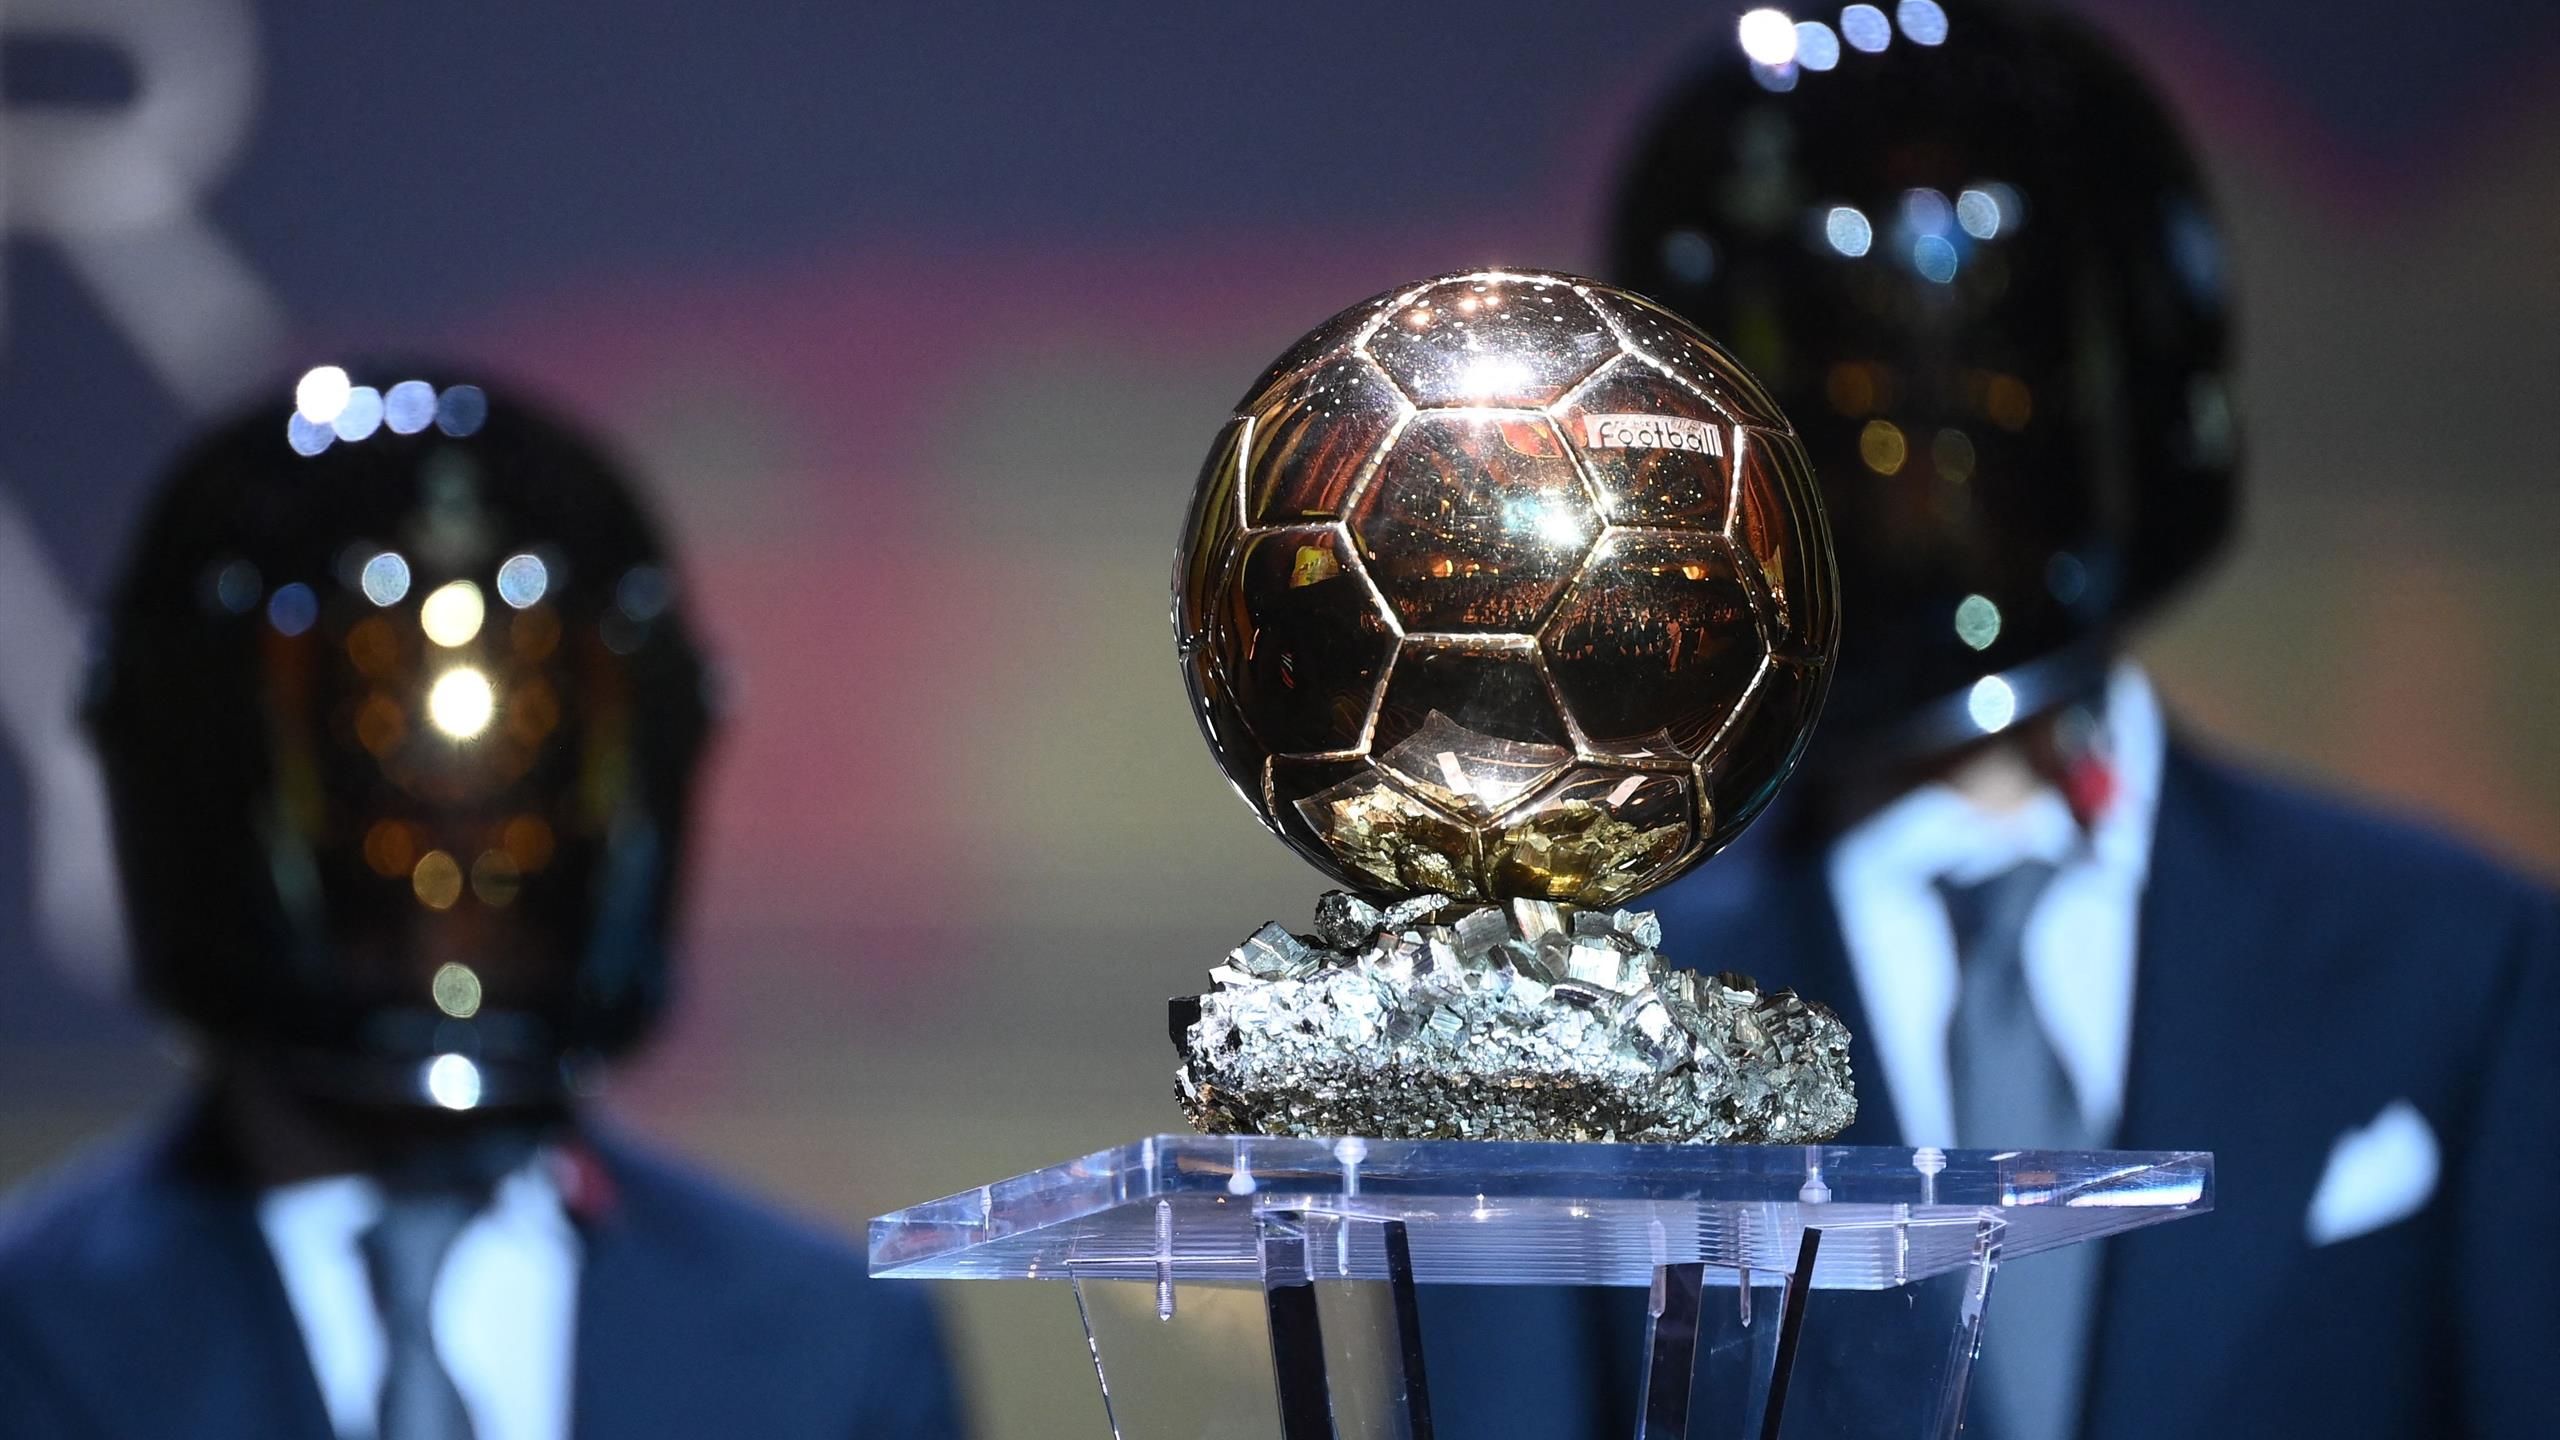 Ballon dOr 2022 How to watch the ceremony - Date, time, live stream, how to follow on Eurosport